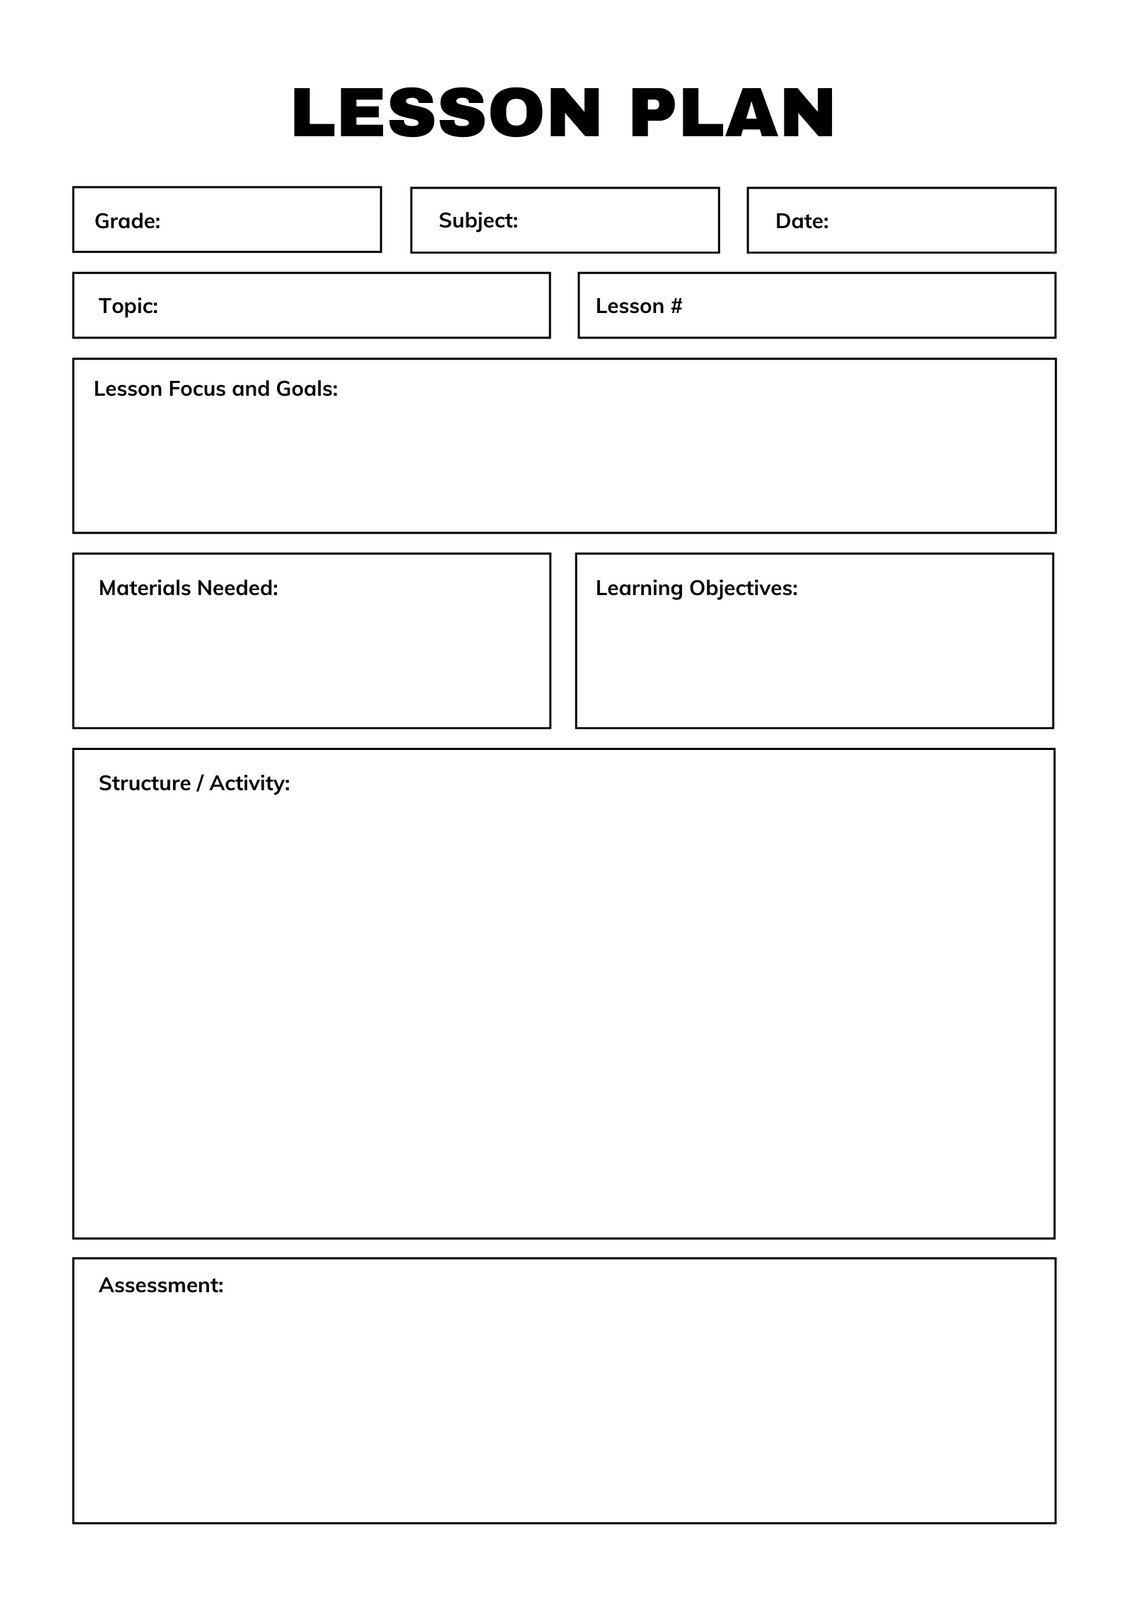 Lesson plan templates you can customize for free  Canva With Regard To Blank Syllabus Template